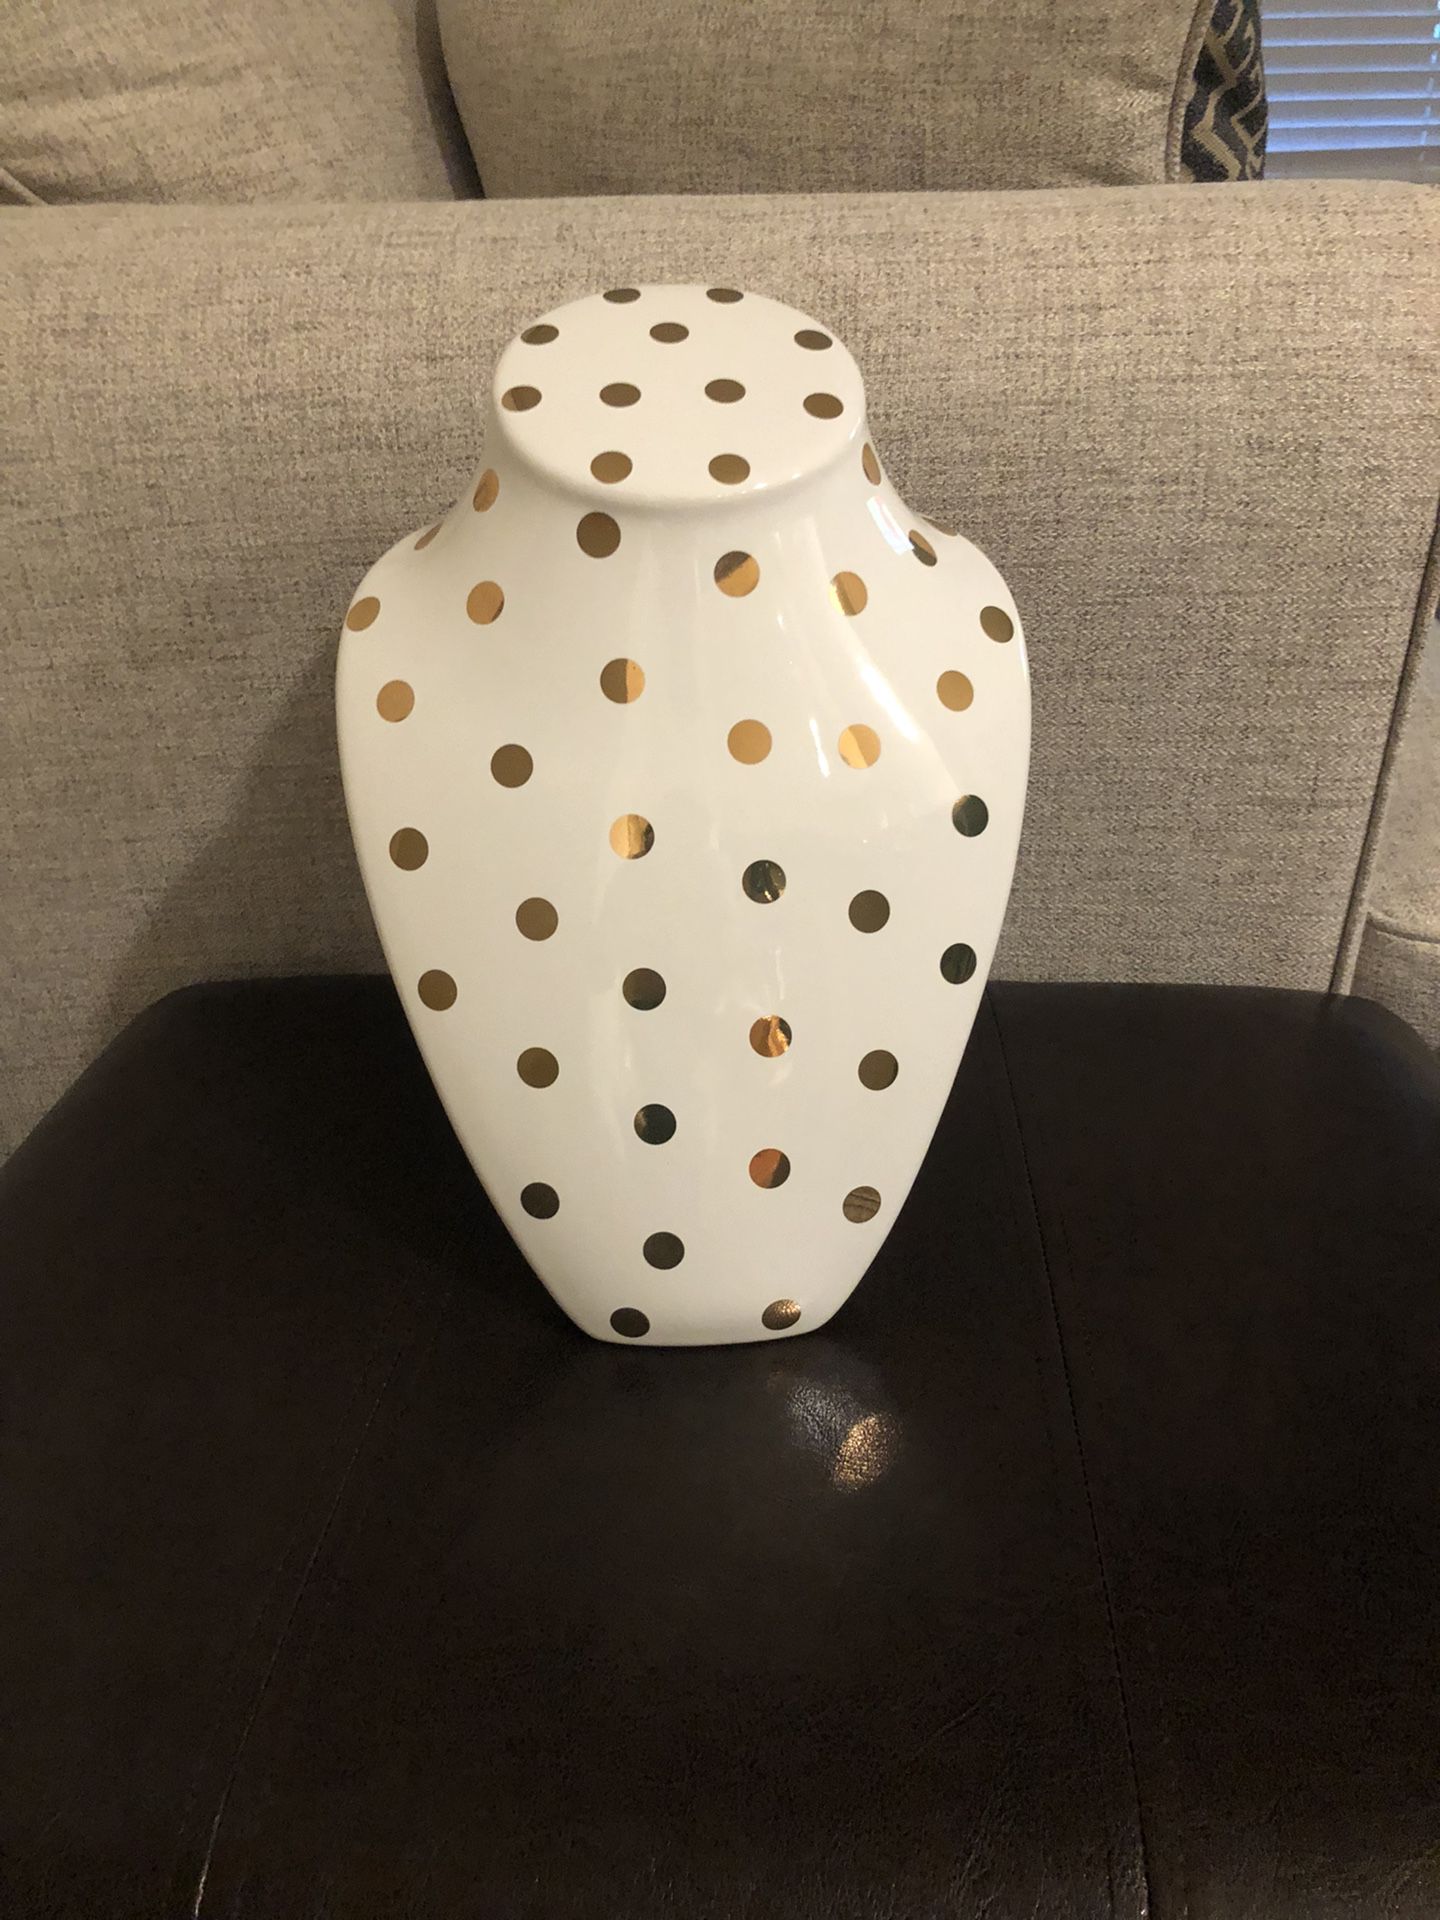 White with Gold Polka Dots Ceramic Jewelry Holder